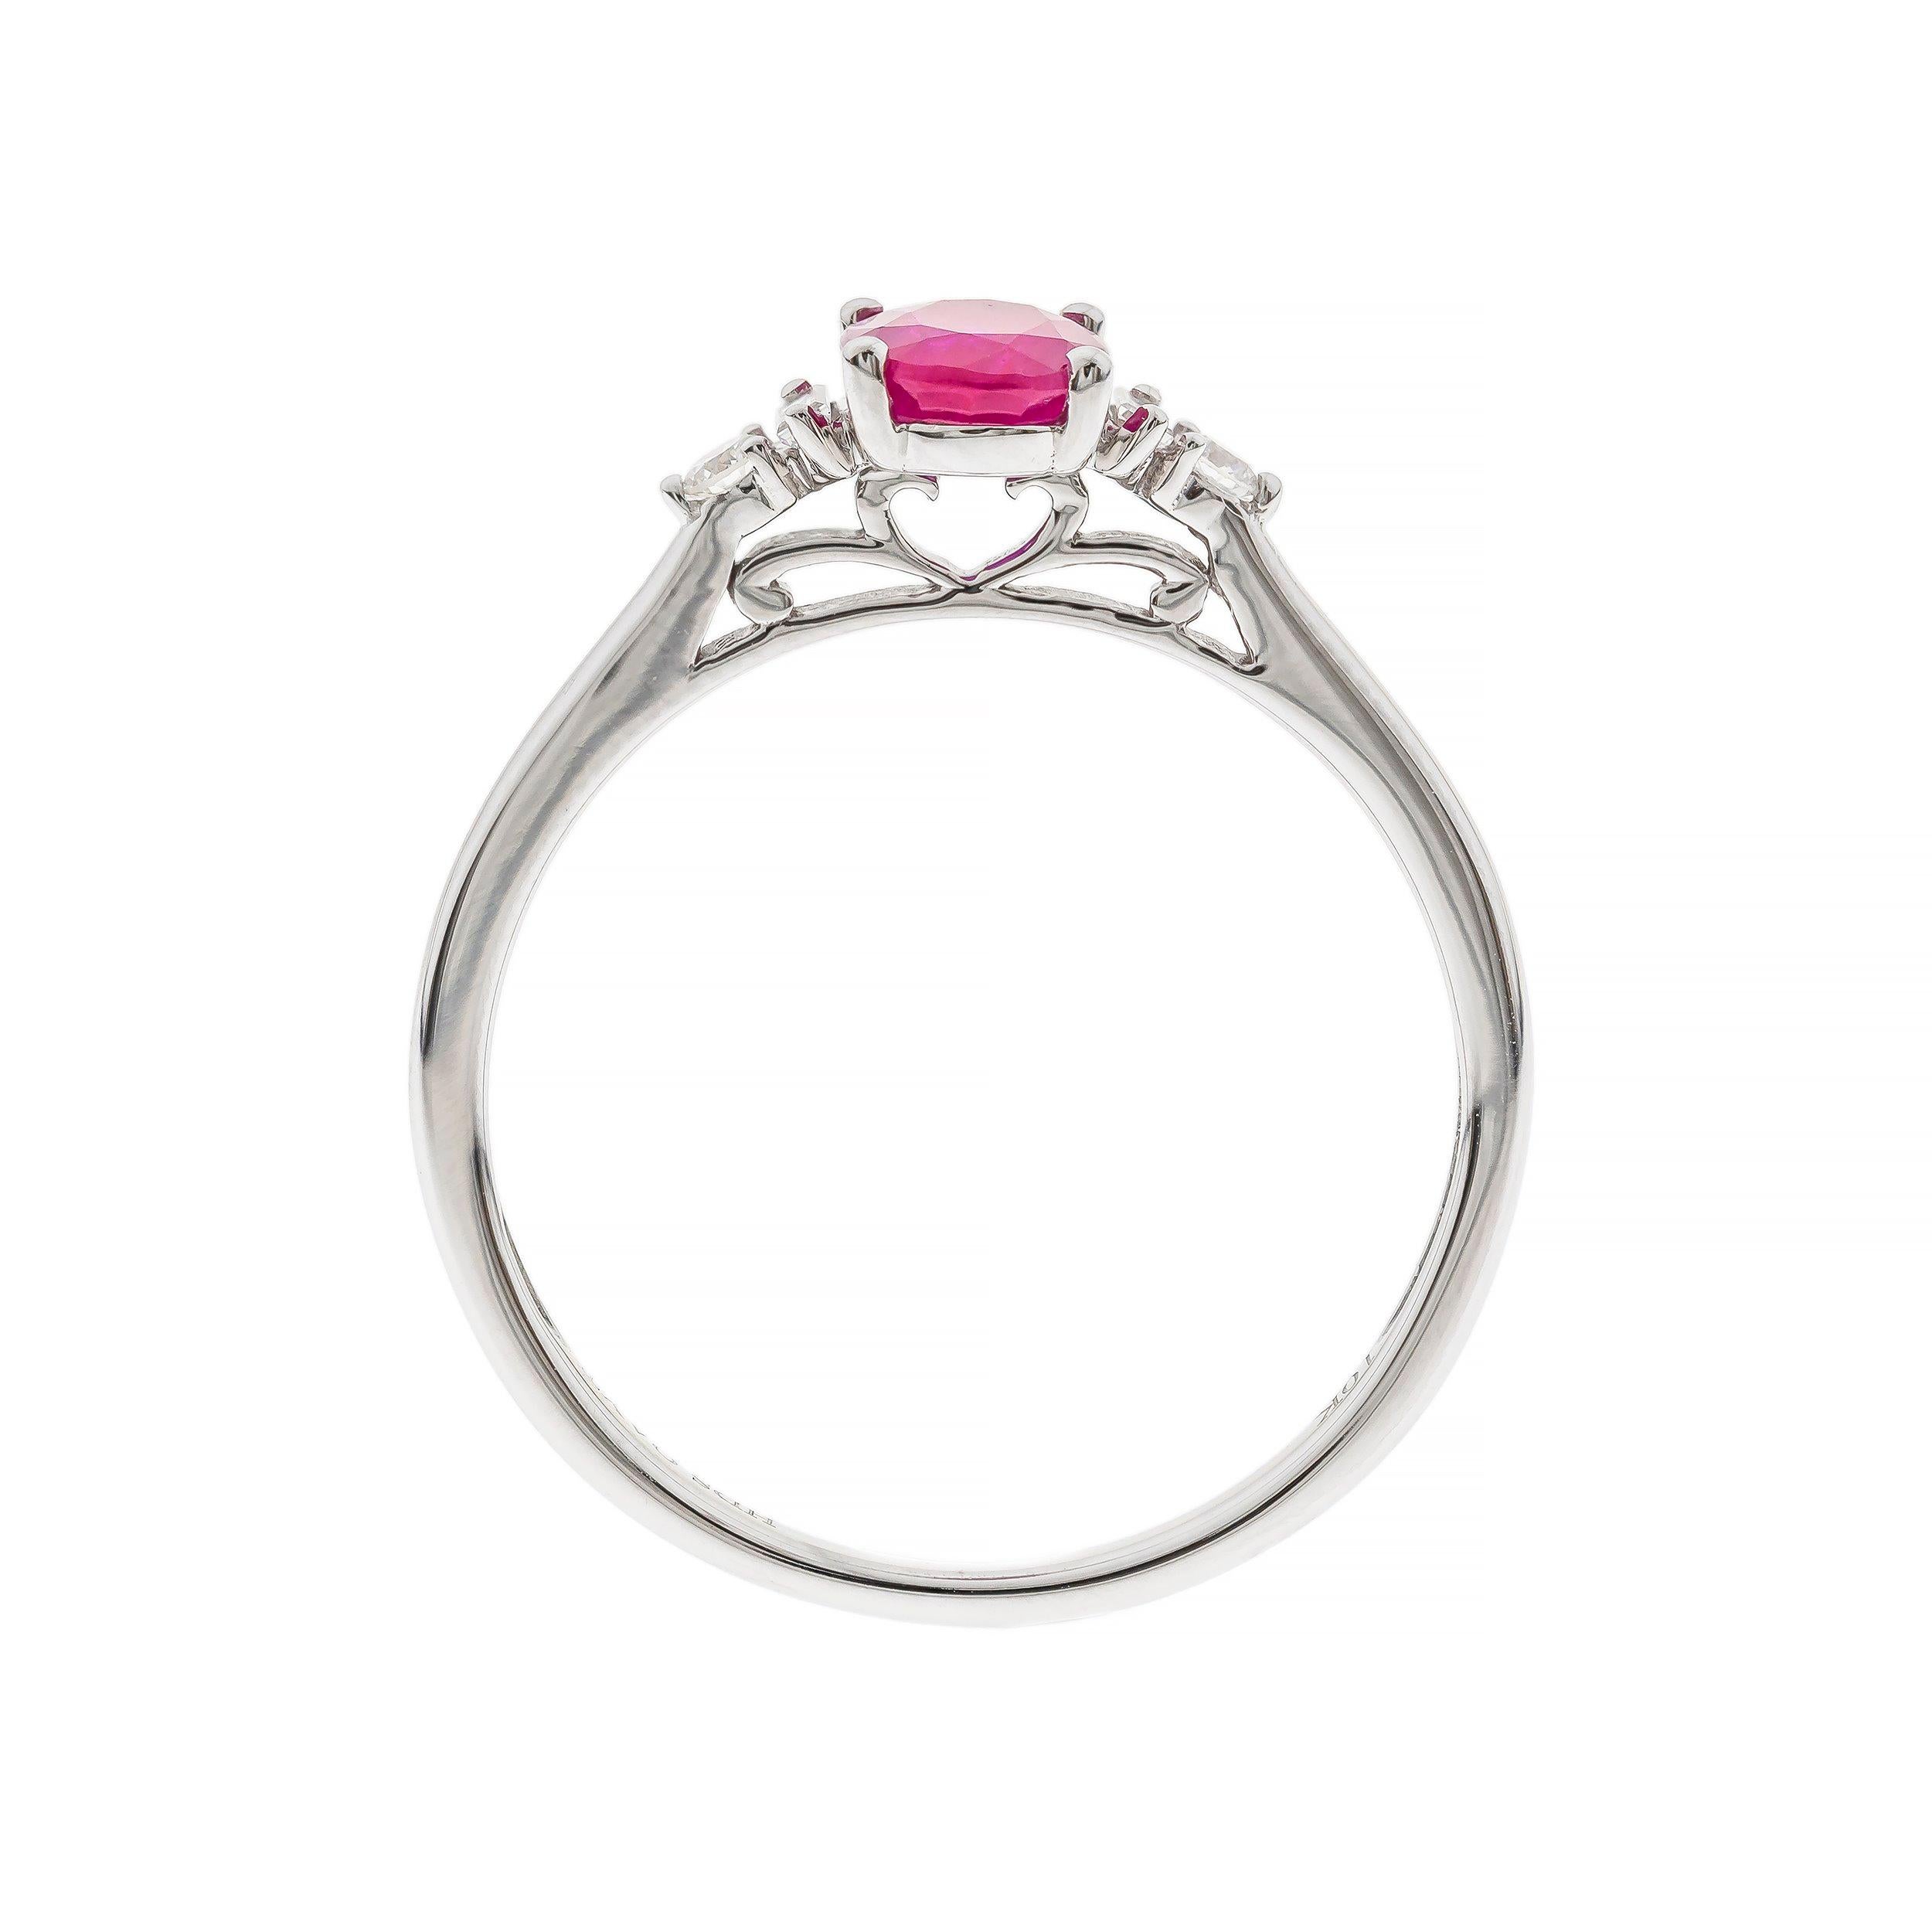 Stunning, timeless and classy eternity Unique Ring. Decorate yourself in luxury with this Gin & Grace Ring. The 10K White Gold jewelry boasts 7x5 mm (1 pcs) 0.86 carat Oval-Cut Prong Setting Ruby, along with Natural Round-cut white Diamond (2 Pcs)